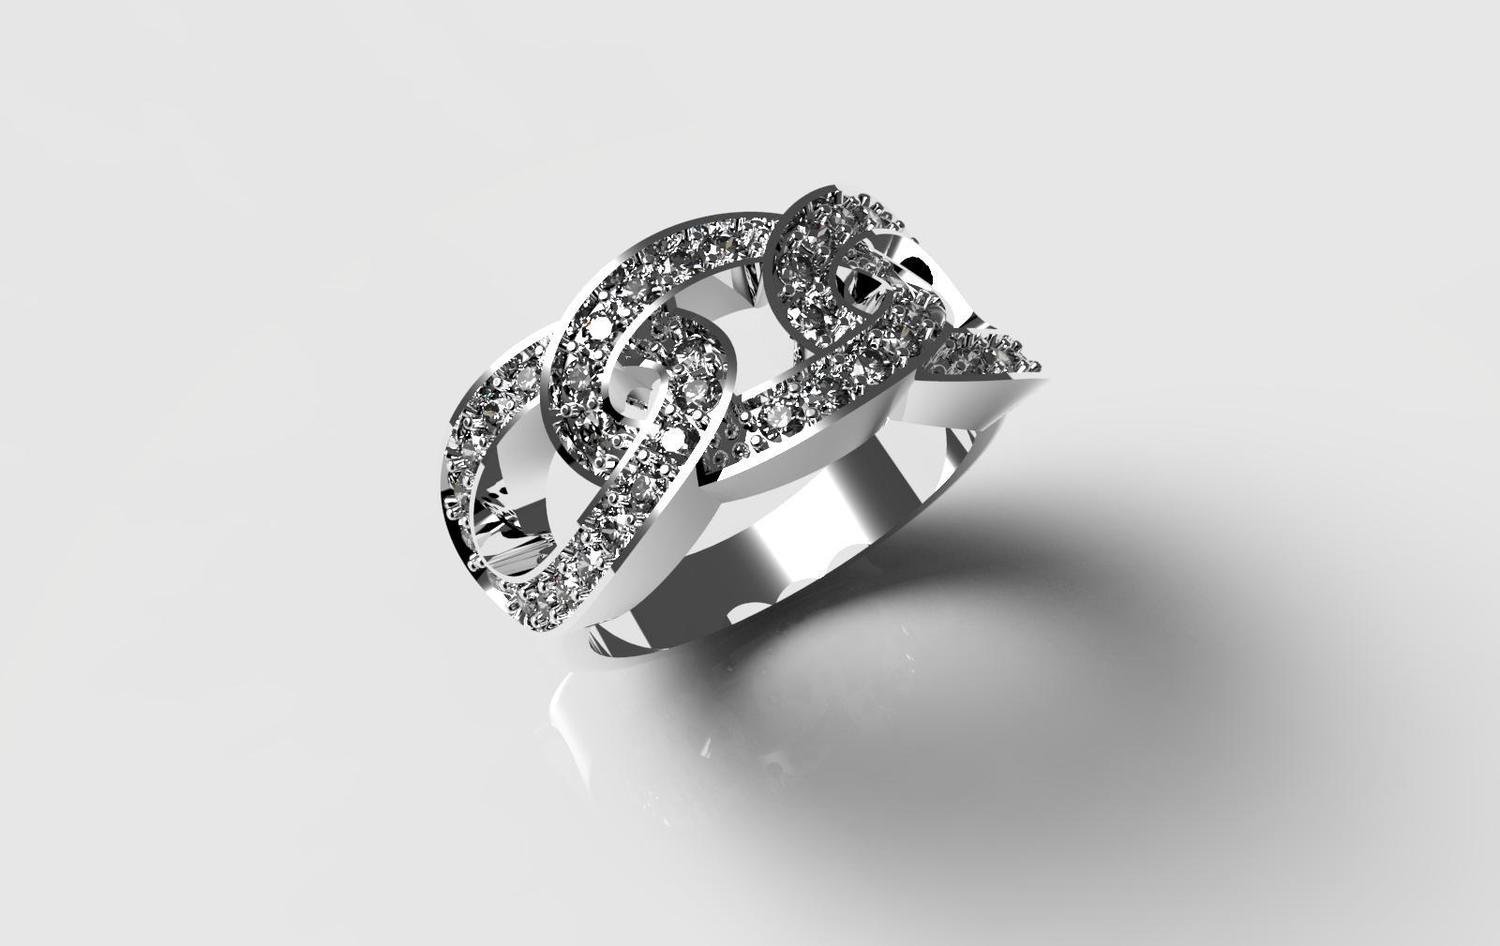 3D CAD Model of Engagement Ring with Diamonds